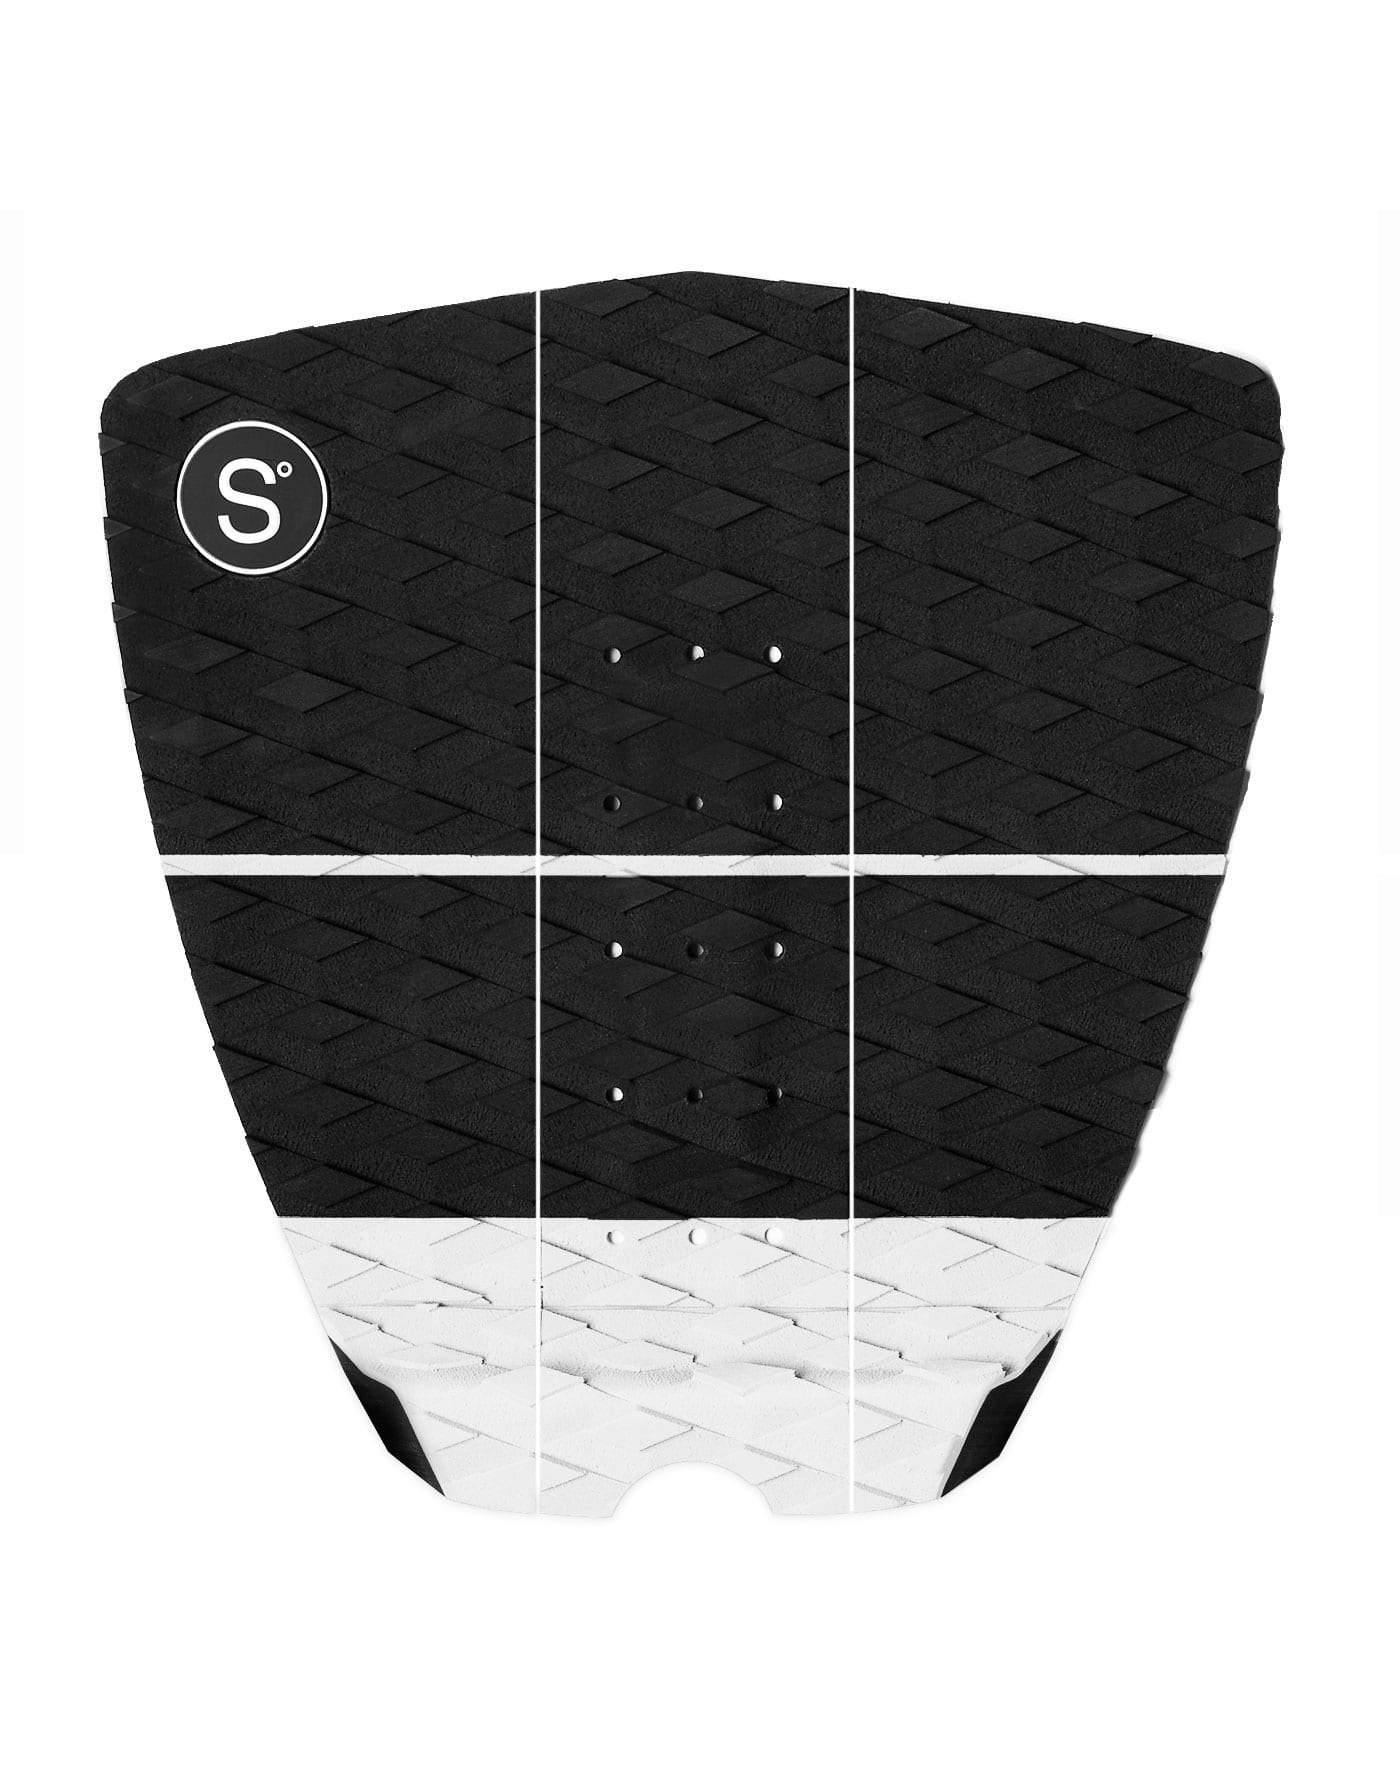 N°6 Sympl 3 Piece Traction Pad - Colors Vary - Urban Surf